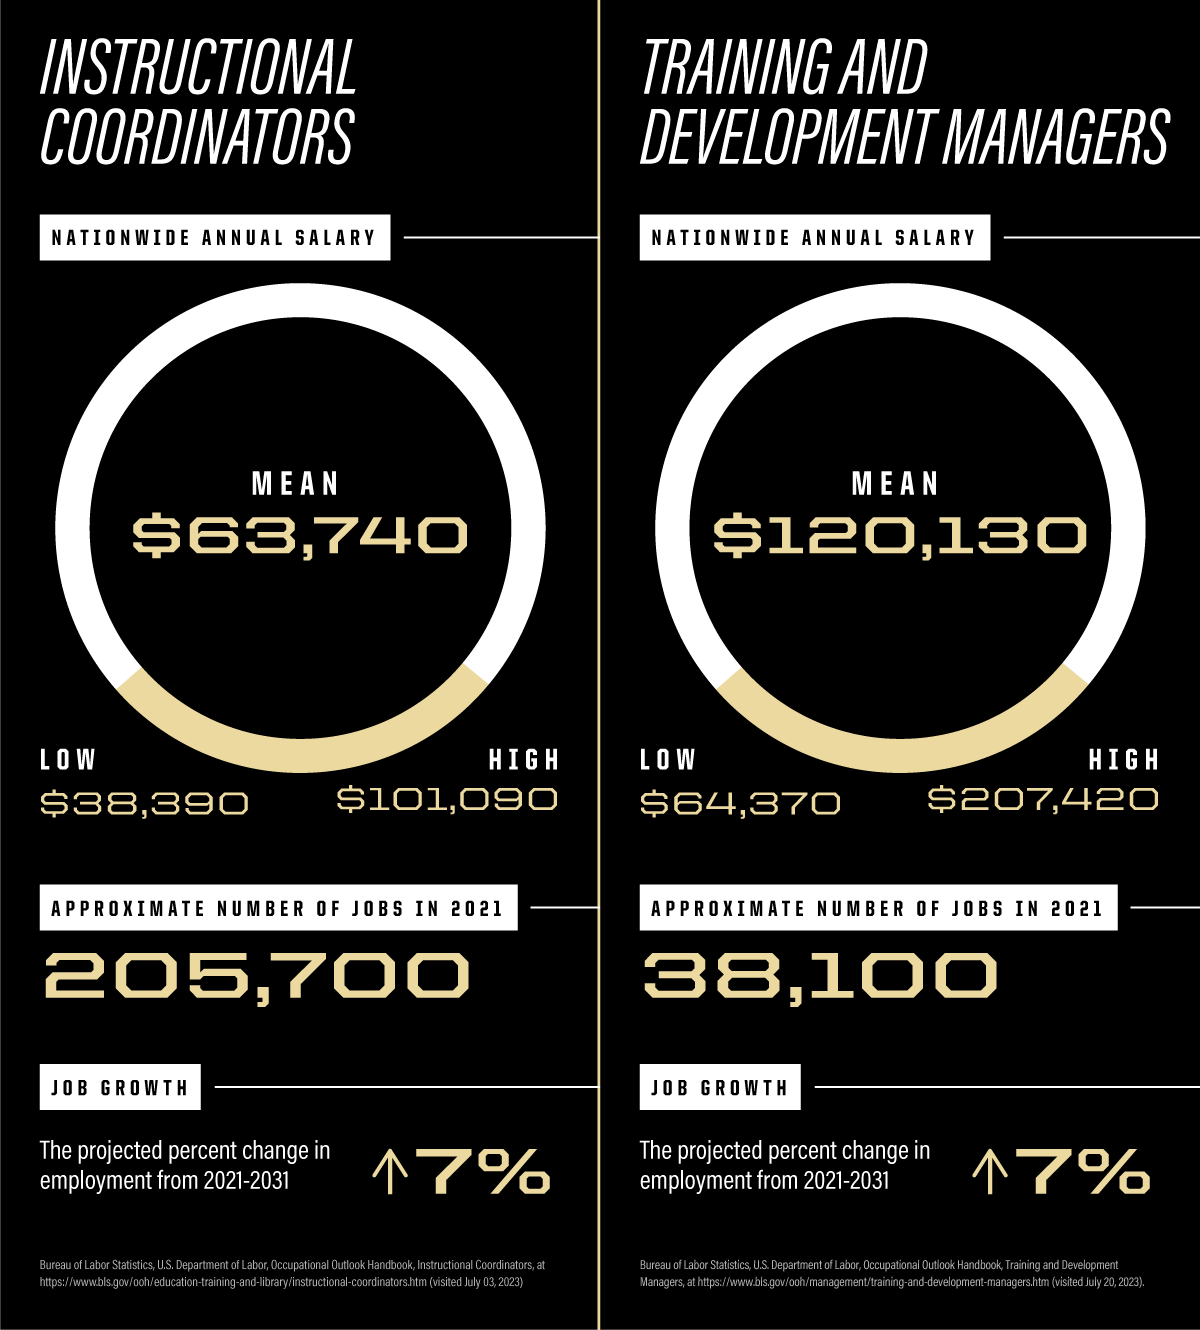 Chart comparing mean annual salary for instructional coordinators, $65,500, to training and development managers, $115,180